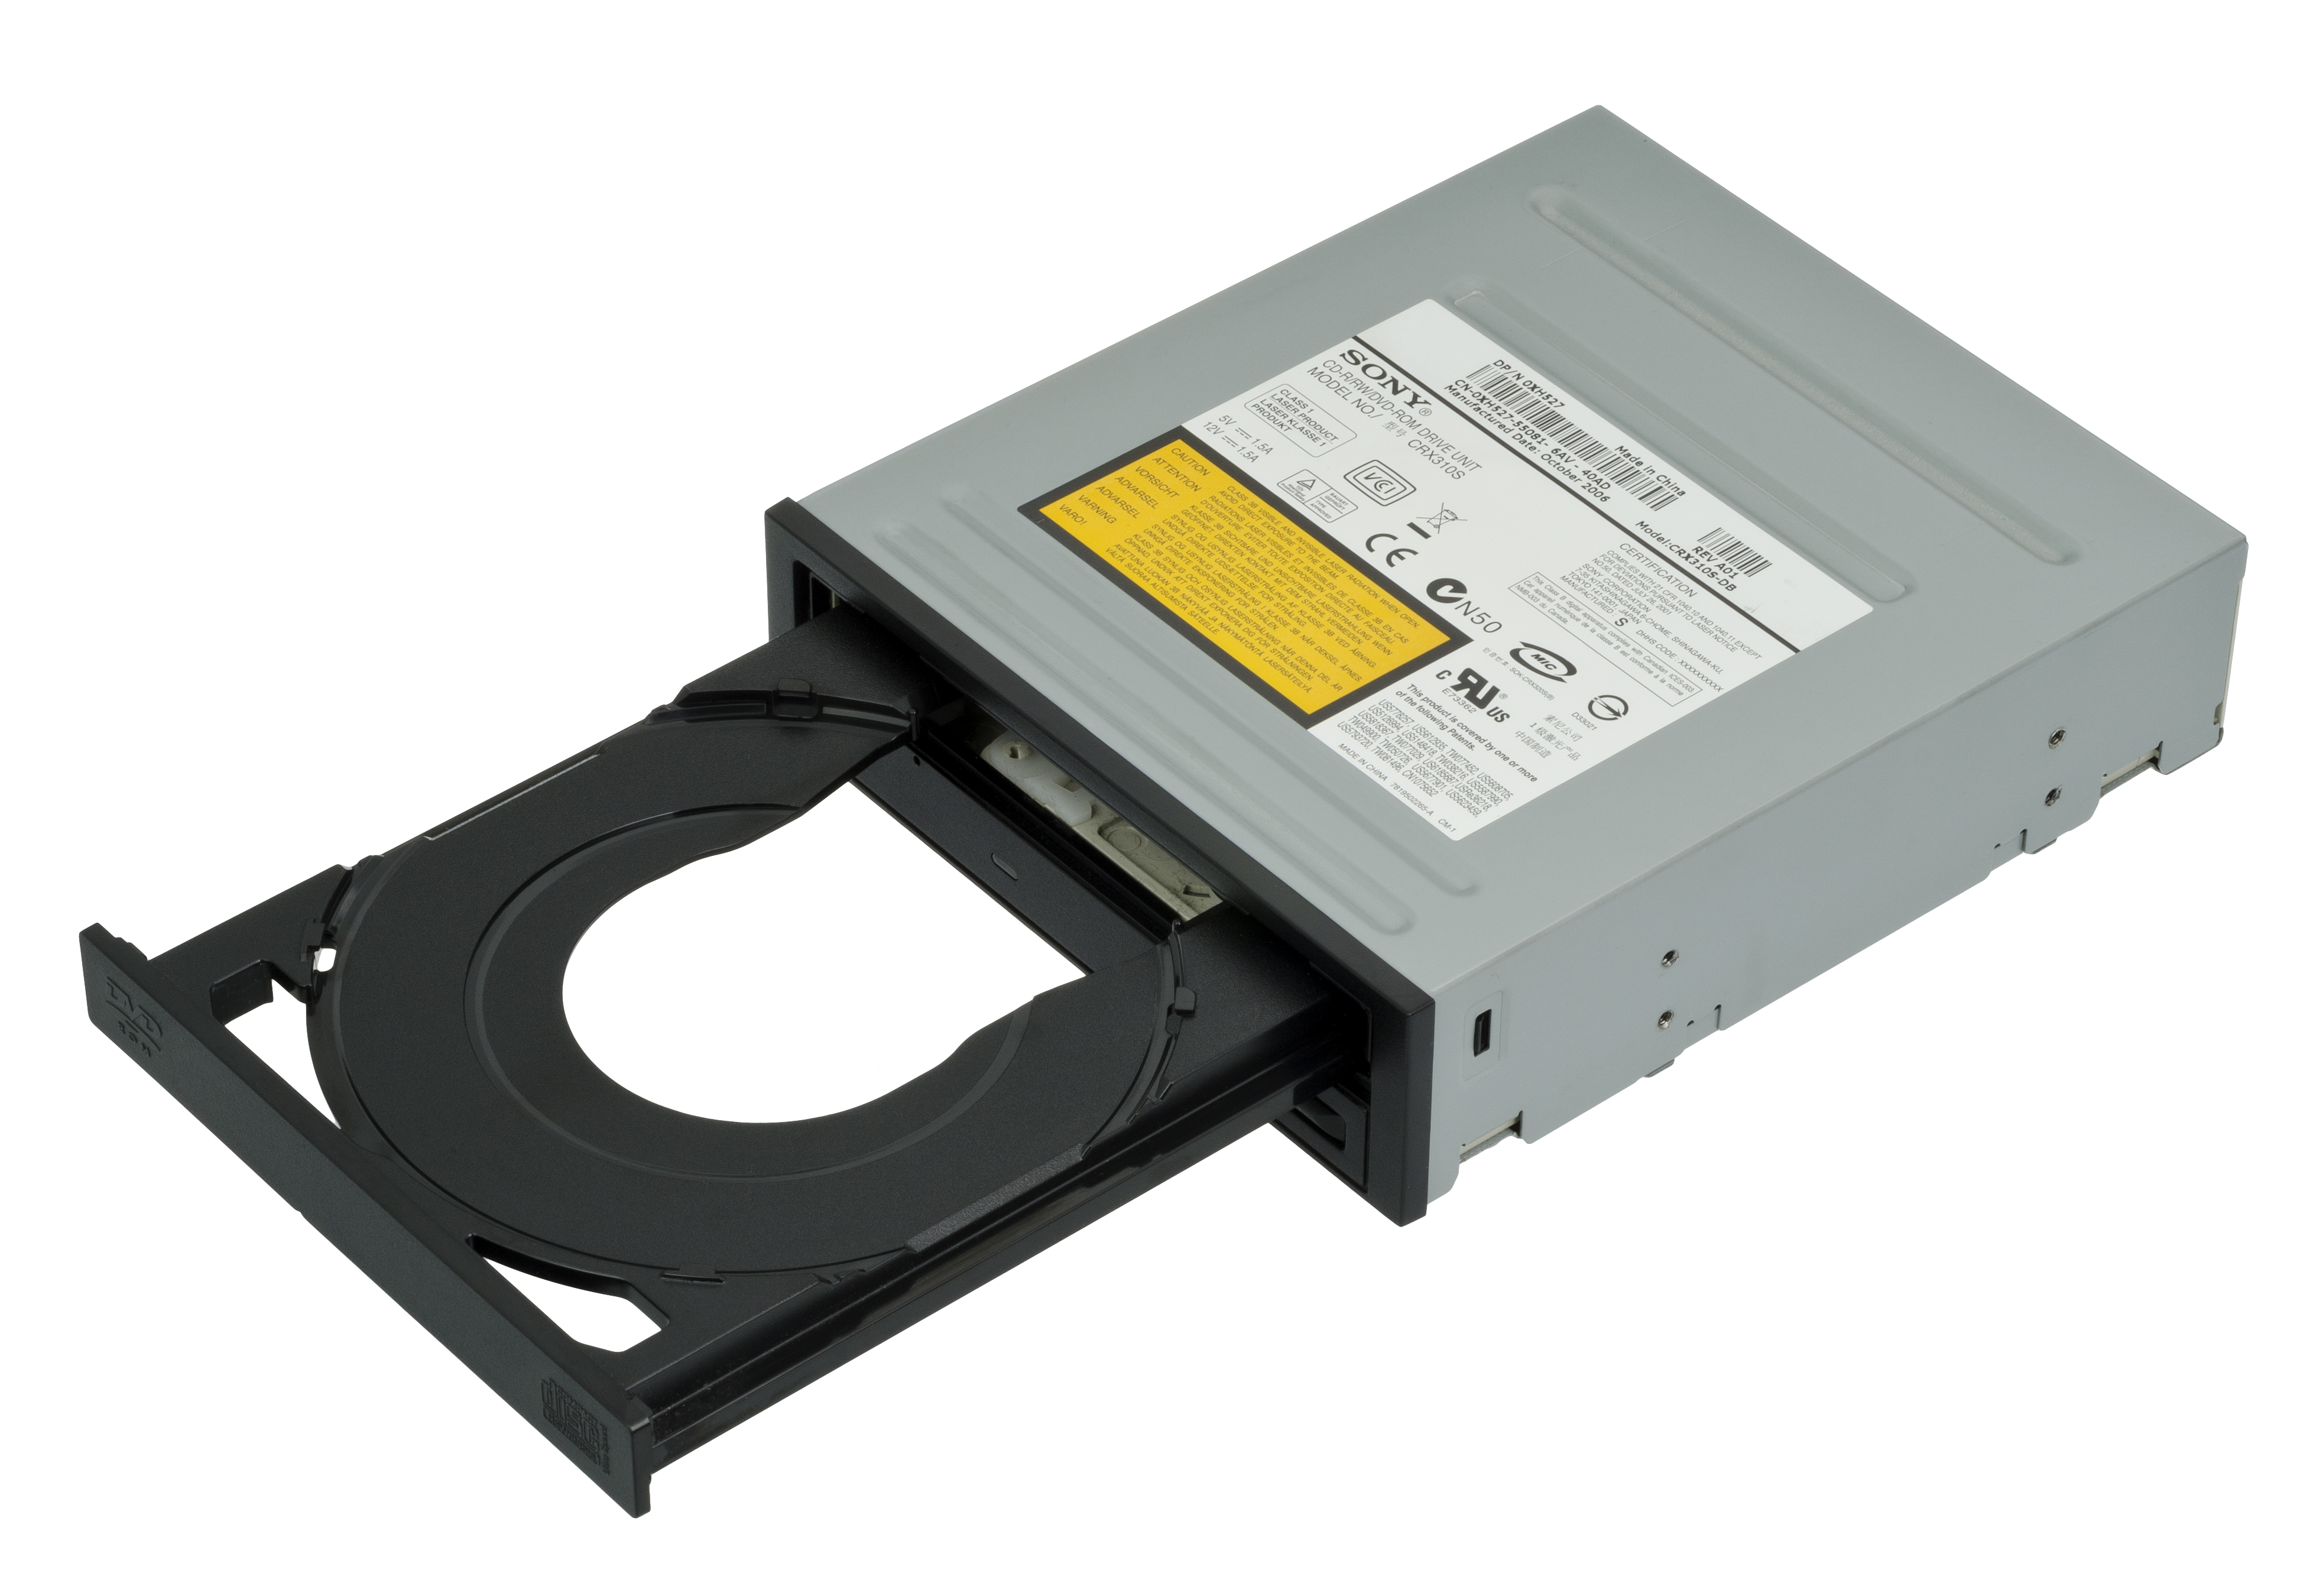 CD/DVD drive with a red X mark